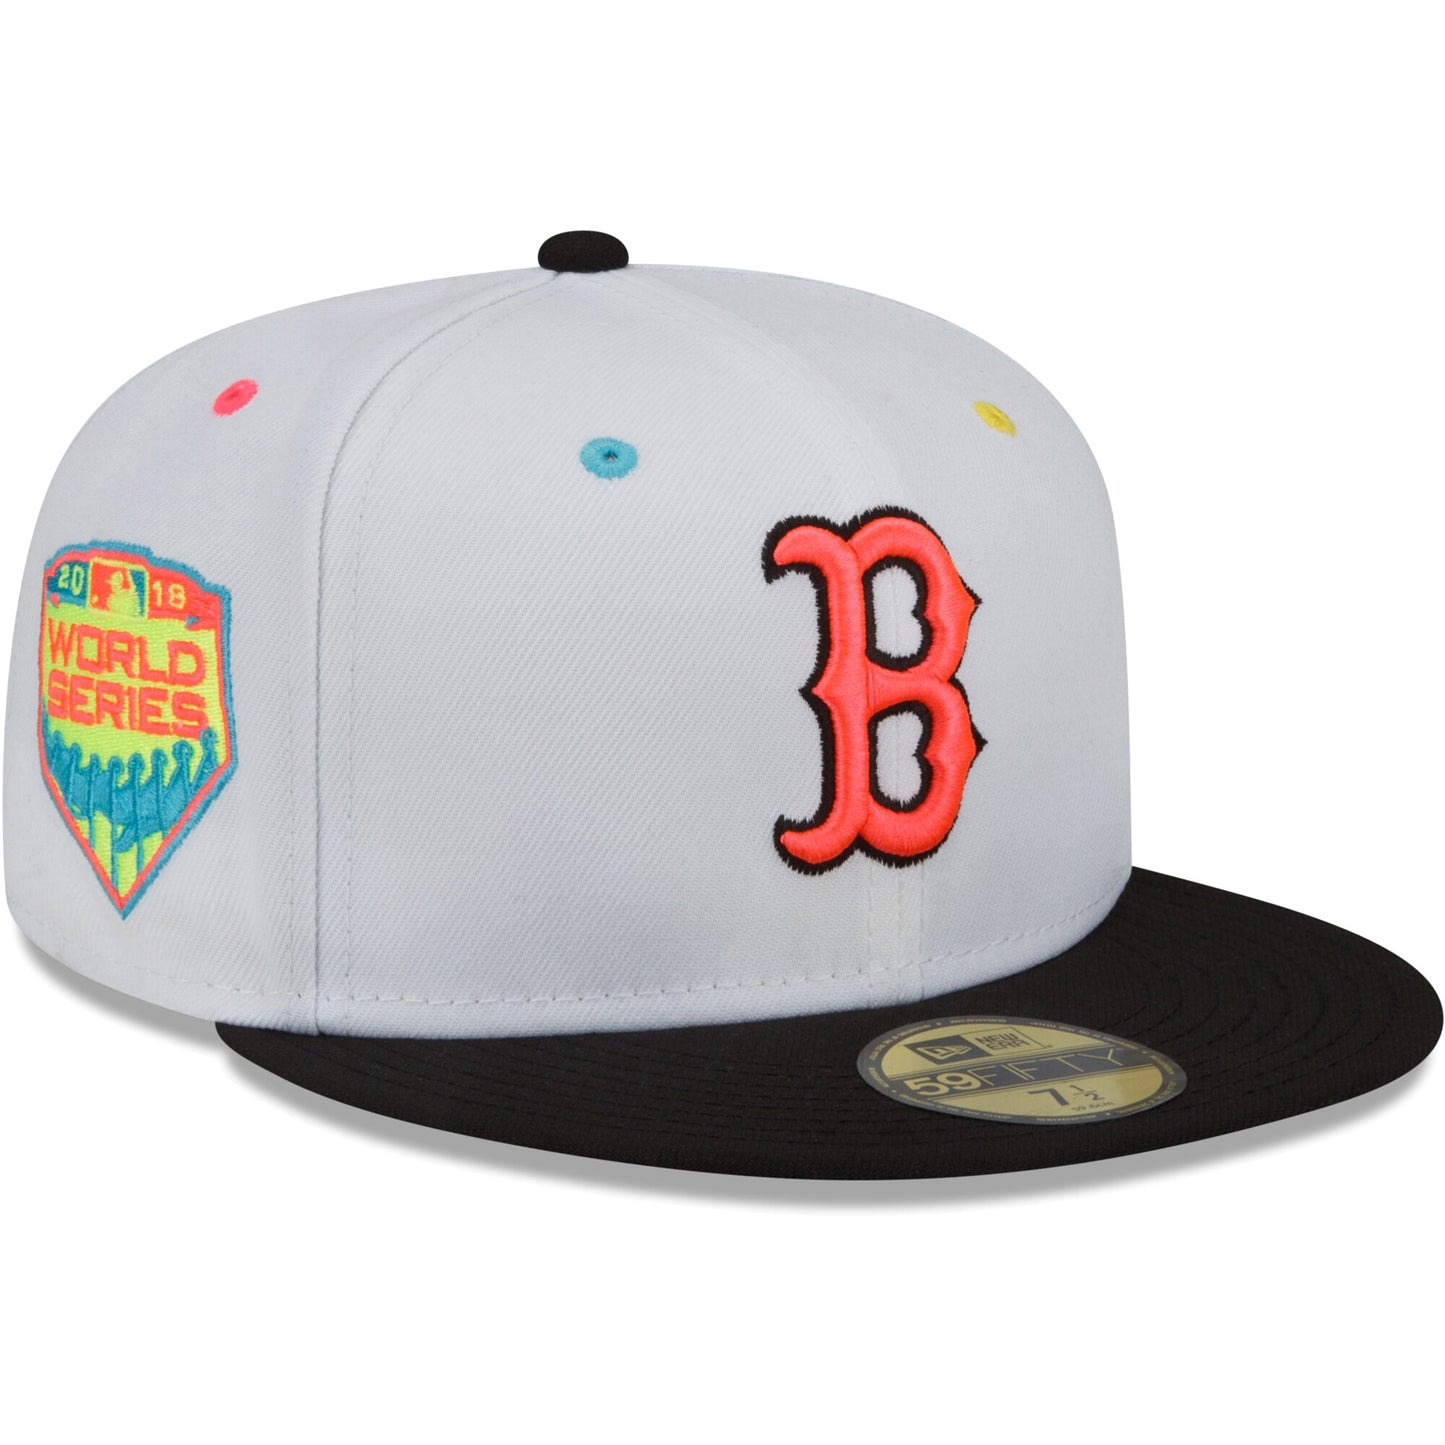 Boston Red Sox New Era 2018 World Series Champions Neon Eye 59FIFTY Fitted Hat - White/Black